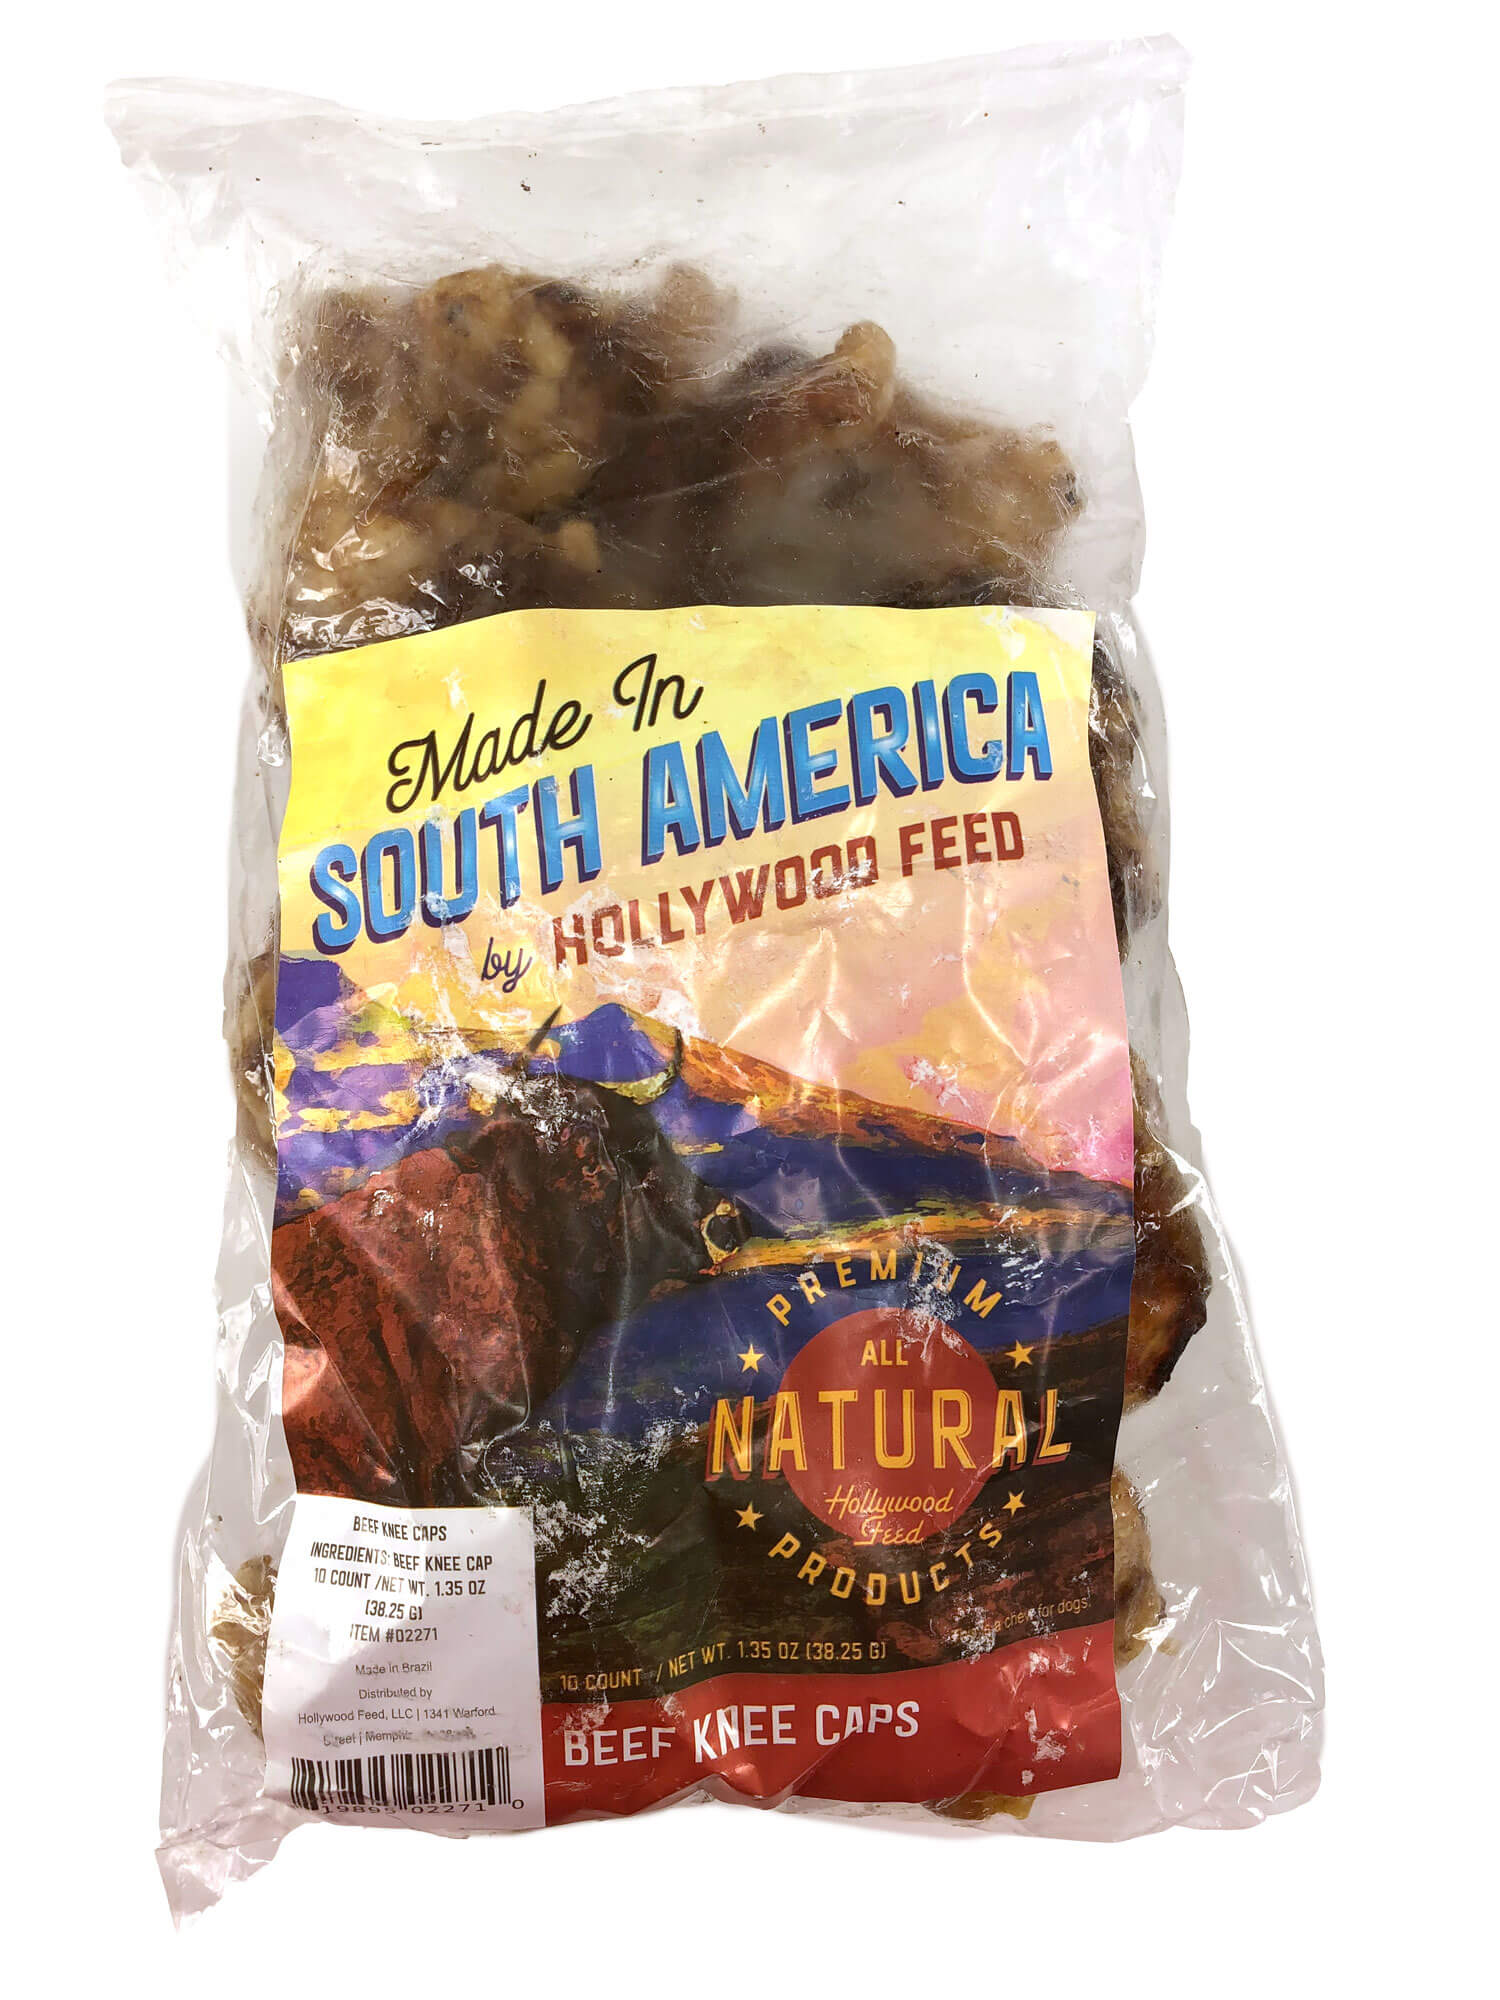 Hollywood feed made in south america dog chew - knee cap - 10 count bag